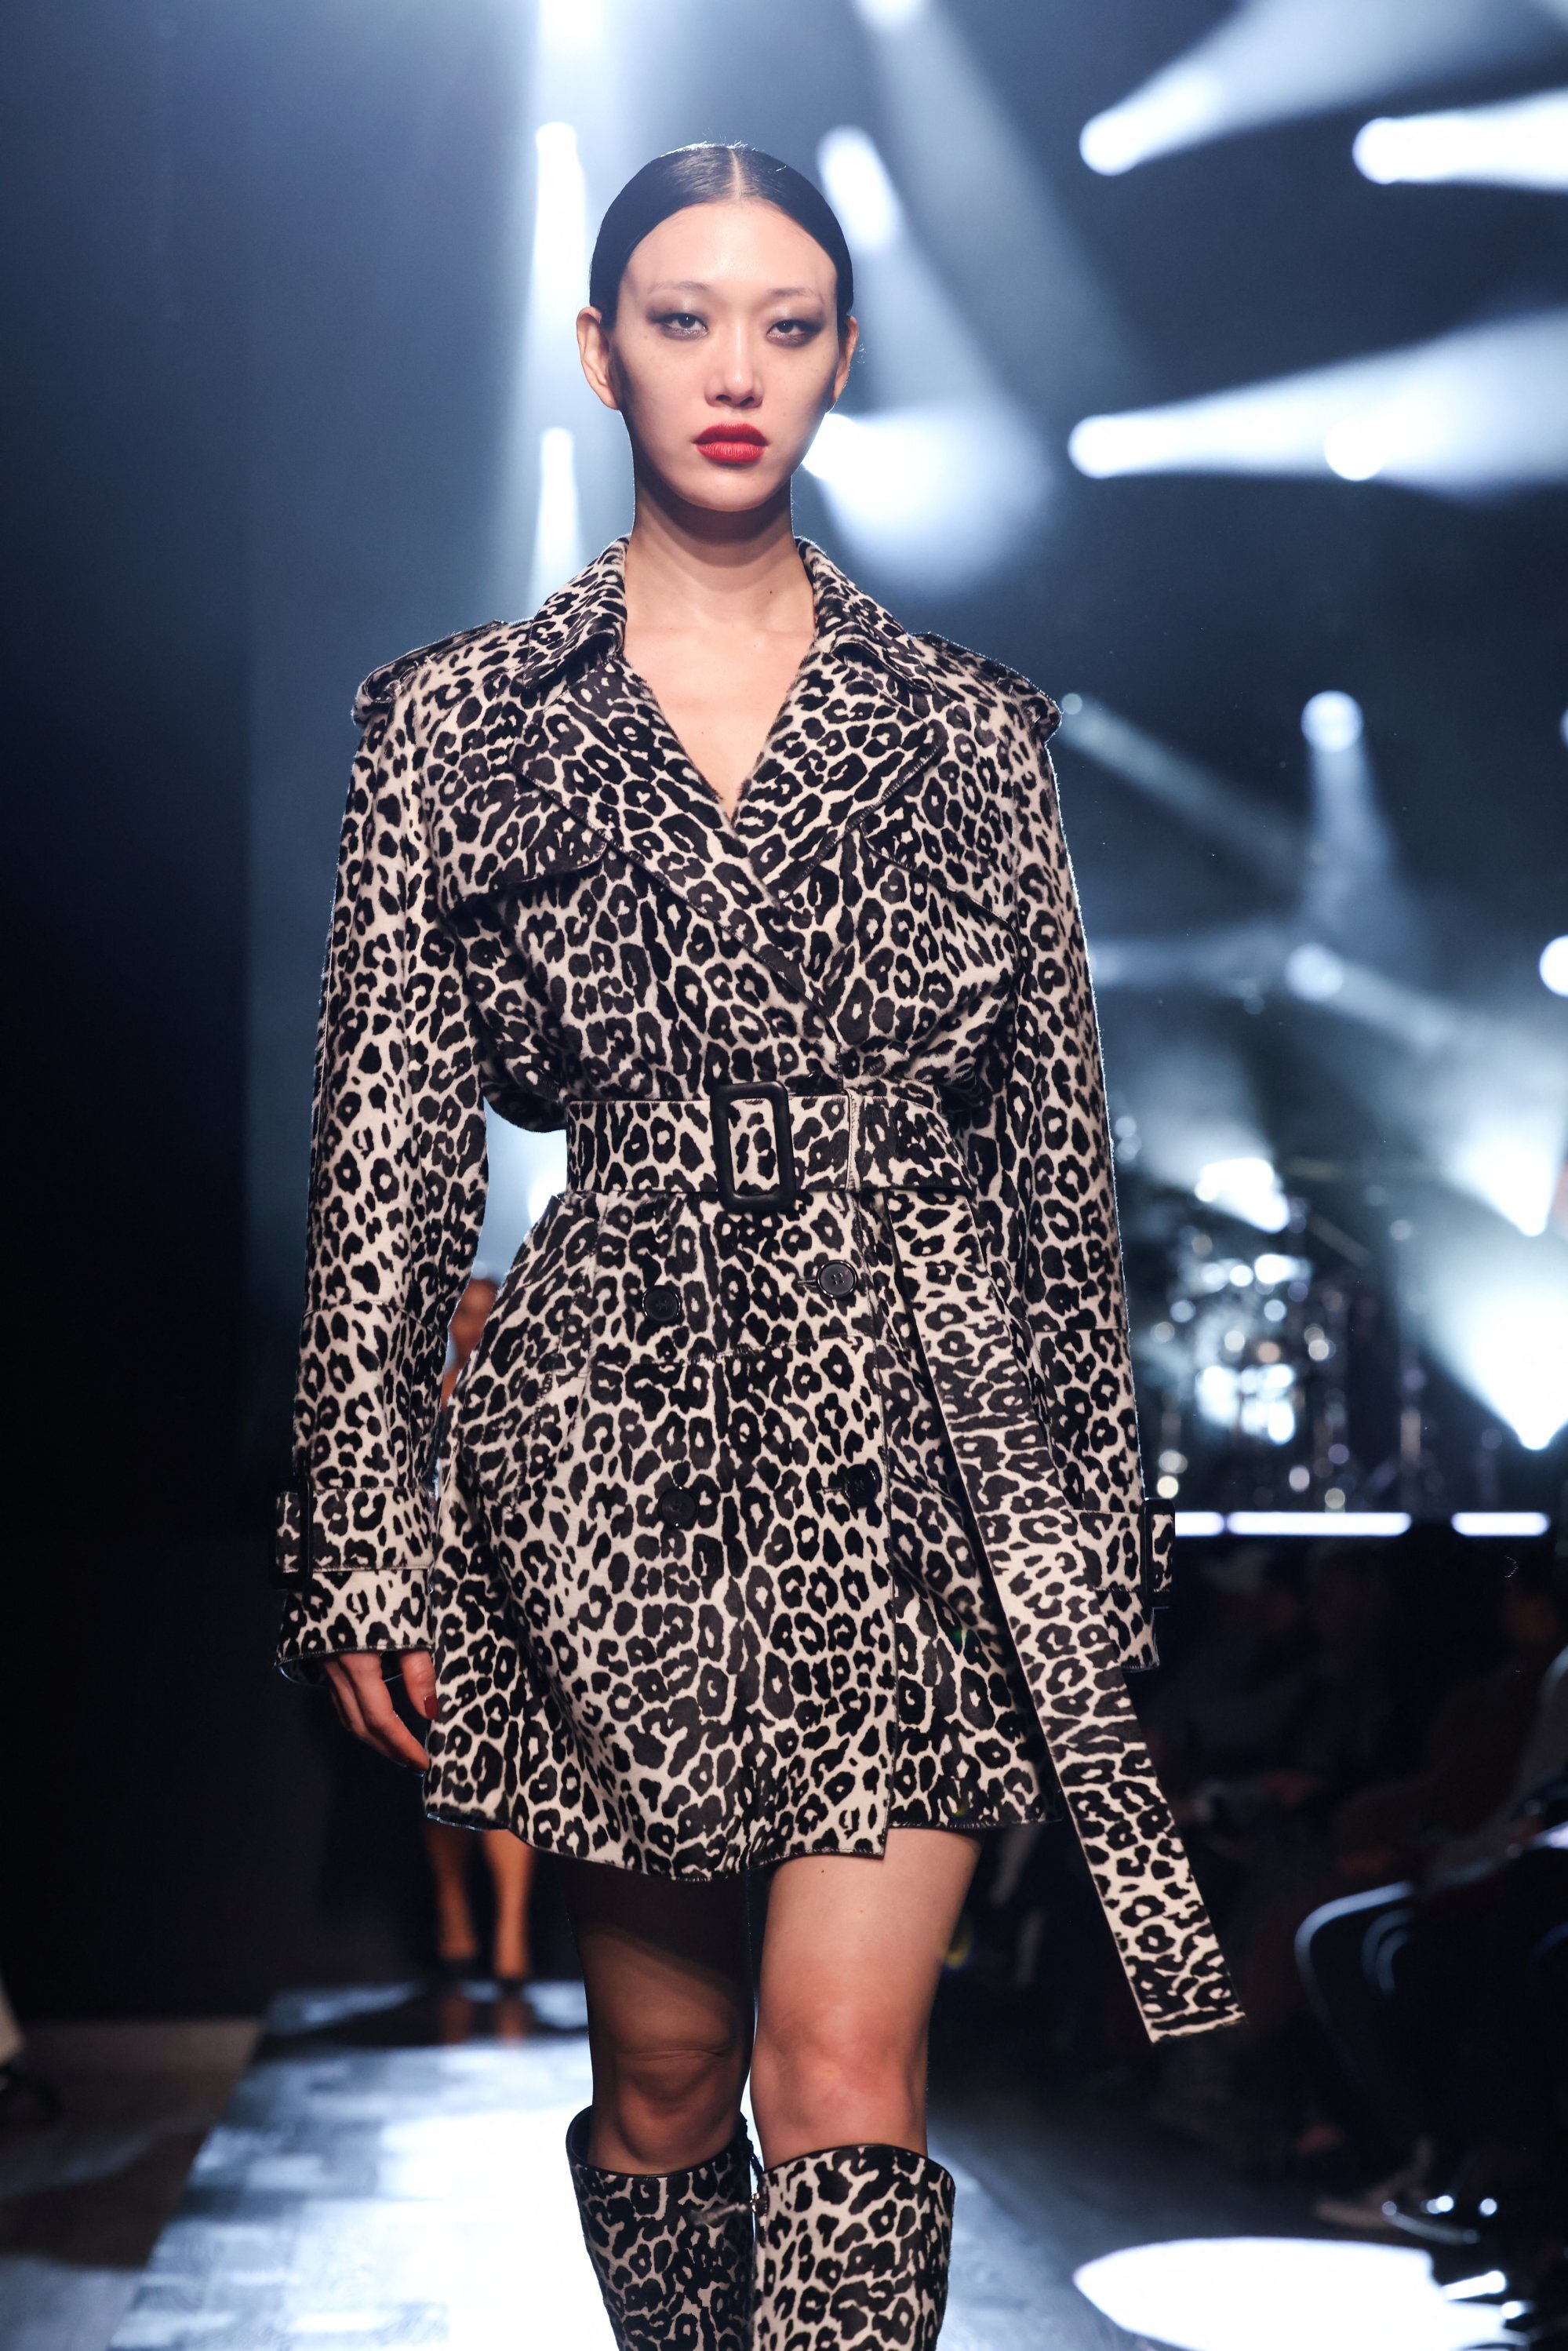 Michael Kors toasts New York nightlife in latest collection